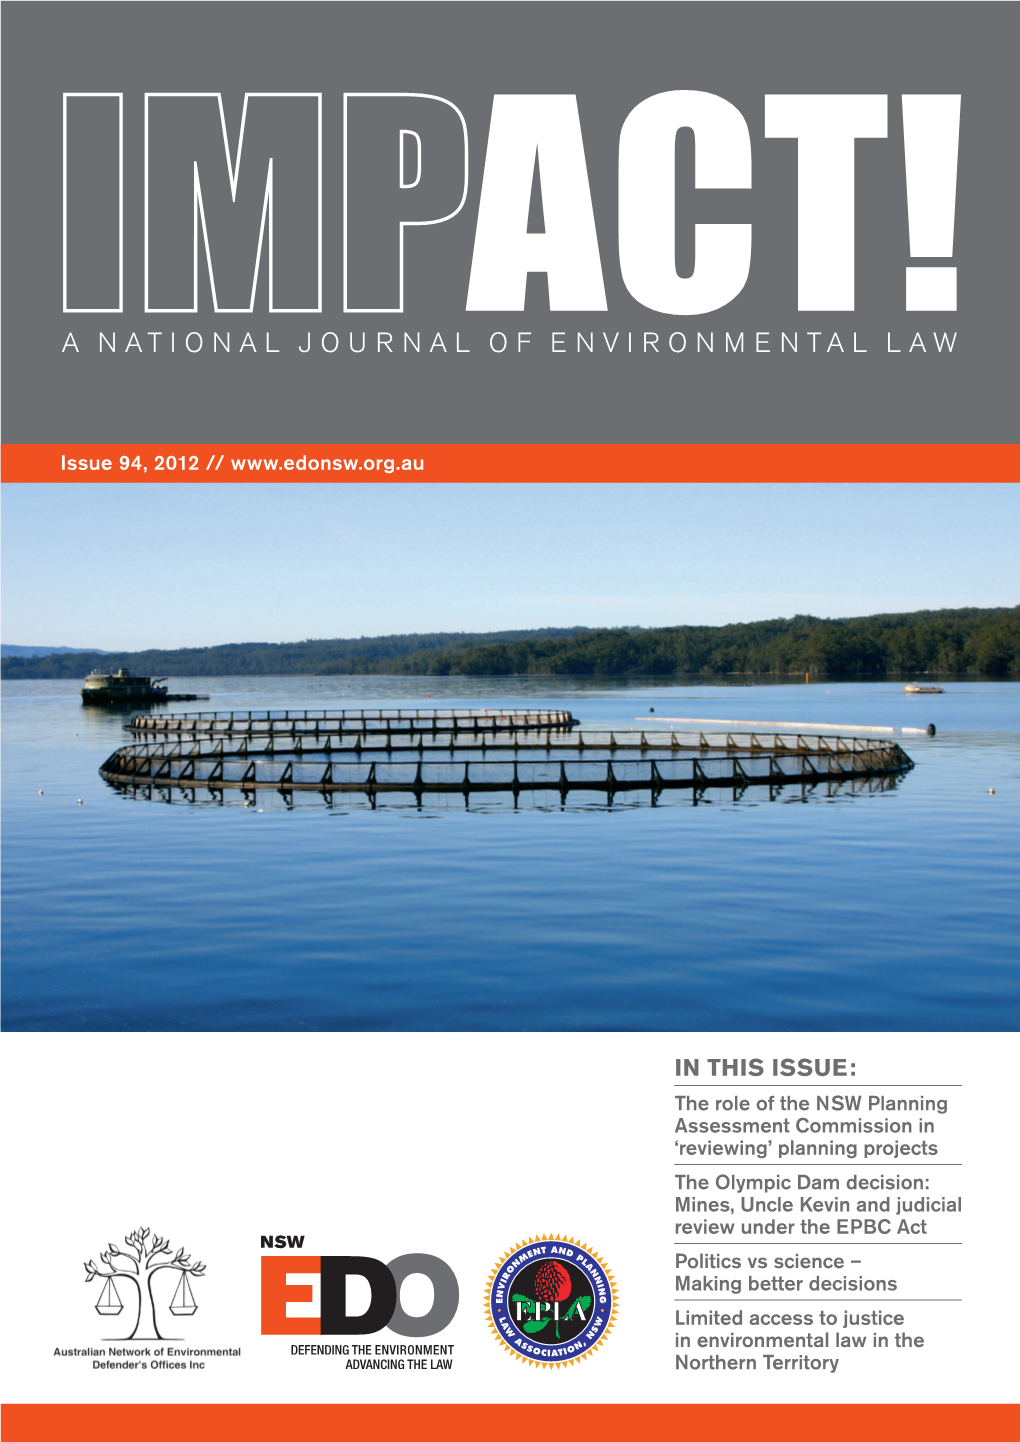 A National Journal of Environmental Law